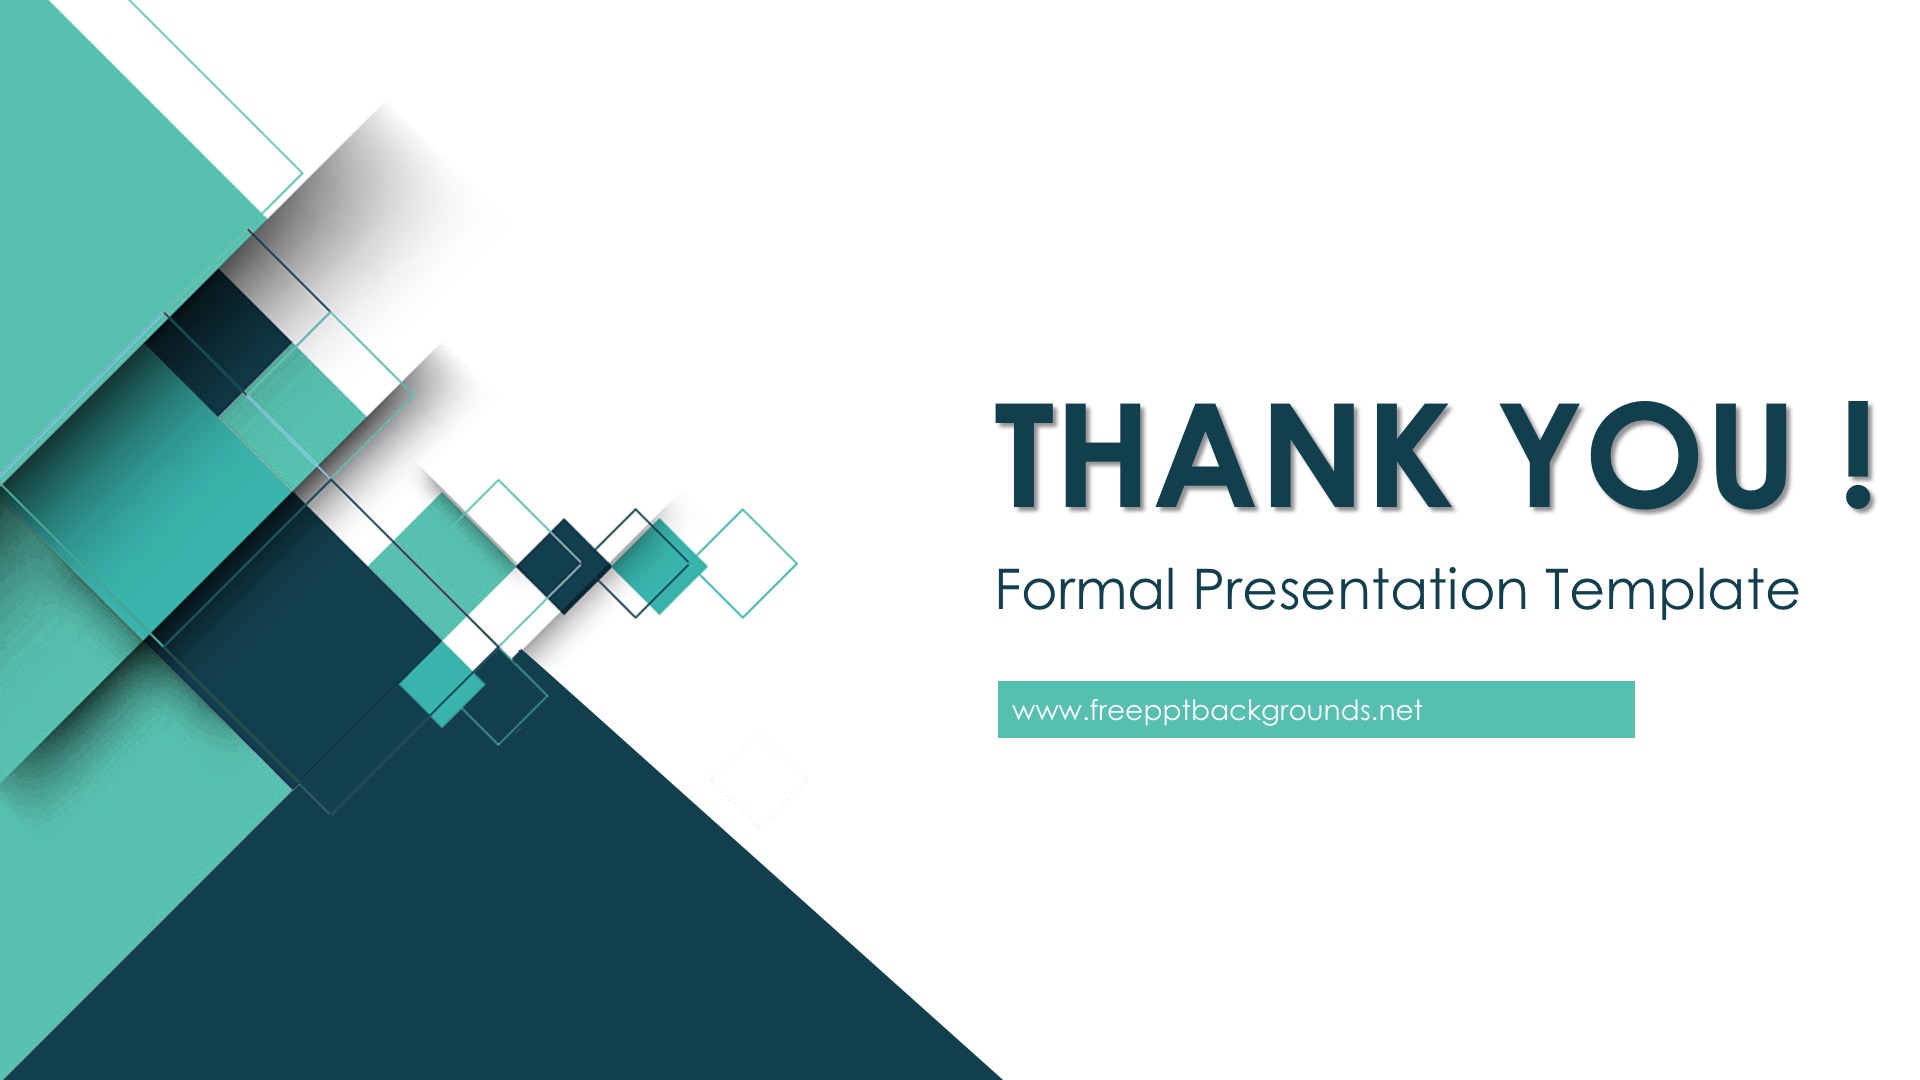 example of formal powerpoint presentation